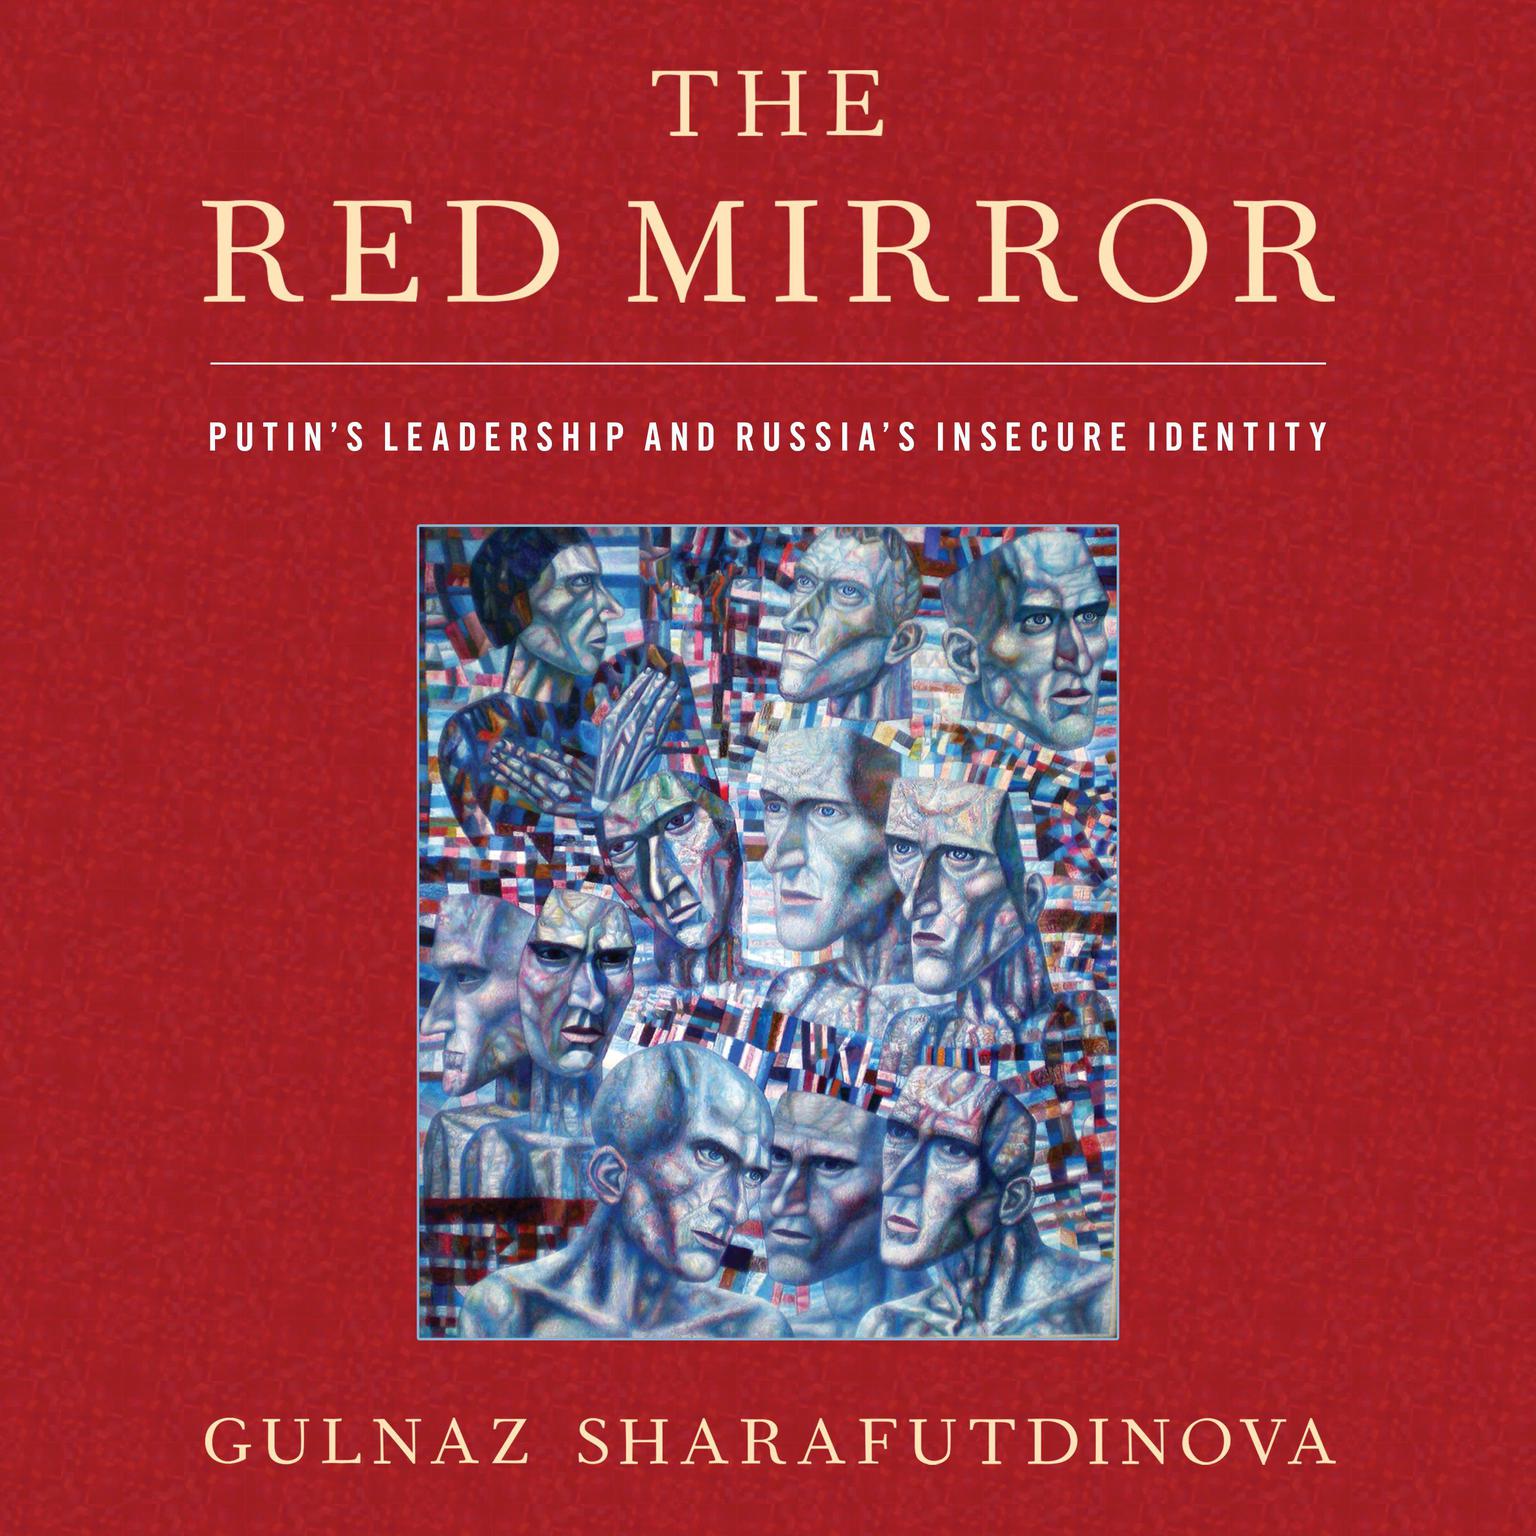 The Red Mirror: Putins Leadership and Russias Insecure Identity Audiobook, by Gulnaz Sharafutdinova